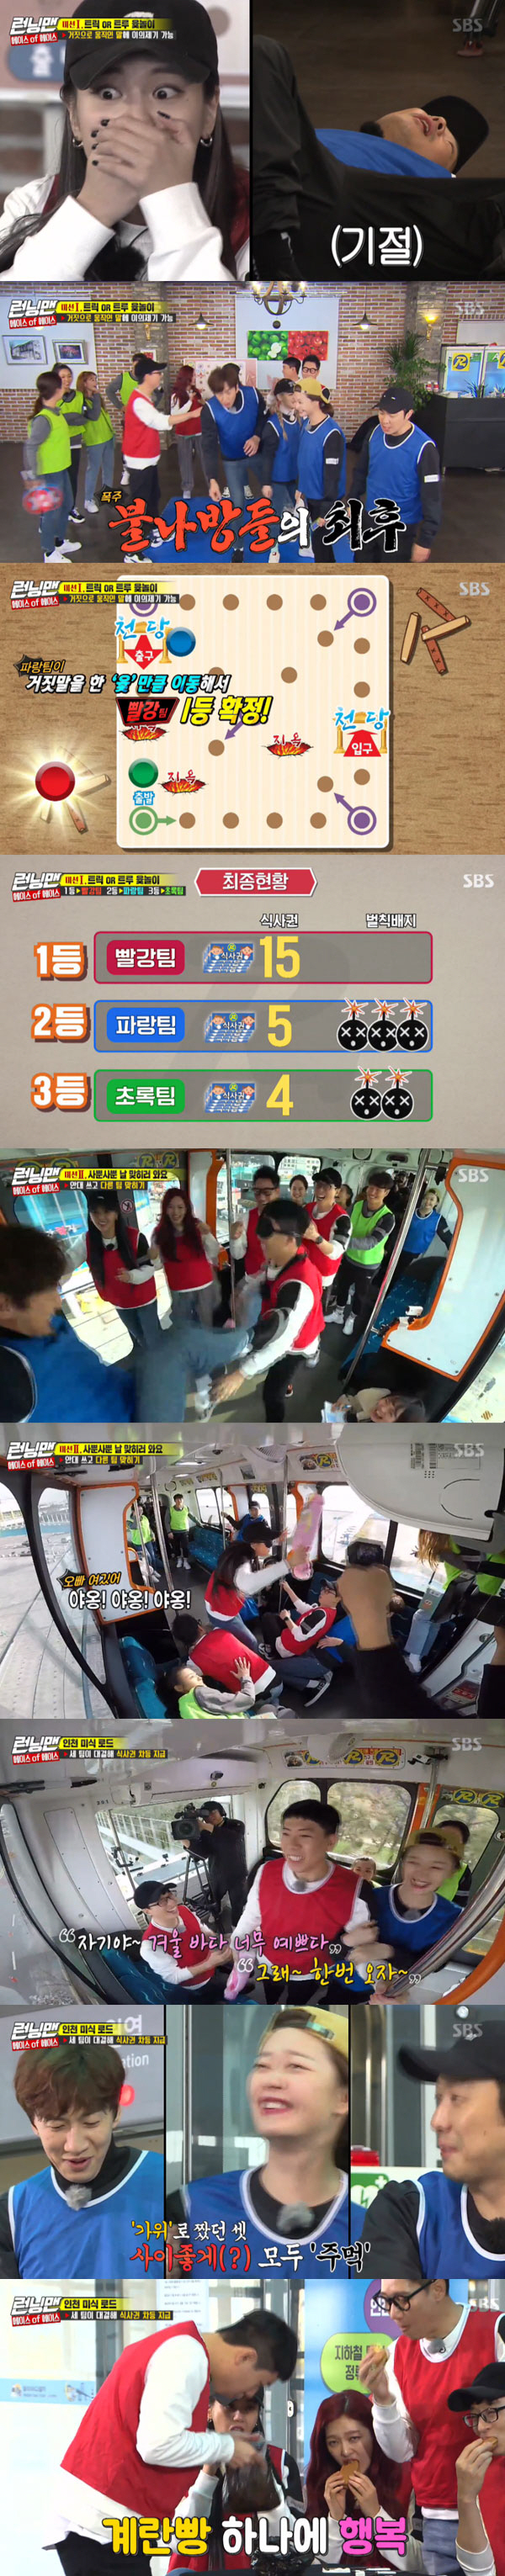 Running Man AOA Jimin carries out fresh cream penaltyOn SBS Running Man broadcasted on the 15th, AOA appeared as a guest while Incheon Gourmet Road Ace Of Ace Race was held.On this day, Ace Of Ace Race is divided into three teams and a total of three rounds are held.The menu-specific meal ticket is available after submitting a fixed meal ticket; the meal ticket available on the first mission is paid by the number of team members; however, a penalty badge is paid to members who fail to eat.The person with the most penalty badges and the one person who is identified will be punished together.Jimin, who was in first place through Game, decided on the team.As a result, Kim Jong-kook, Song Ji-hyo, Sulhyun, Yuna were one team for Konyaspor team, Lee Kwang-soo, Jeon So-min, Jimin, Haha were one team for blue team, and Yoo Jae-Suk, Ji Suk-jin, Yang Se-chan, I have a team.The first mission was to eat jjajangmyeon, chanpon, sweet and sour pork, and to get a meal ticket, trick or true yunori was conducted.The basic rule is the same as the general yut, and the team that comes in first wins the final, but if the runner team throws the yut, the other team can not see the result of the yut.The runner team moves truth or false, regardless of the result of the yut.At this time, the other two teams object if they are thought to be cheating, and if they cheat, the teams words that lie will be In-N-Out Burger and the teams words will take over the gap.Game progressed, and the blue team took the lead alone by eliminating the red teams words due to the failure of the red teams objection.However, the blue team, which has been running out since then, failed to raise objections and eventually won a penalty badge.At that time, the red team properly grasped the lies of the blue team, and the blue team moved as much as the Yut that lied, and the first place was confirmed.In addition, the blue team attempted a last-minute adventure and challenged the Konyaspor teams falsehood and got five meals in second place.The second mission is to Come to the right of me, and the attacker wears an eye patch and finds a team with a pillow and gets one point.However, if the same team is hit or the staff is hit, it will be deducted by two points; the game results show Konyaspor team ranked first, the red team ranked second, and the blue team ranked third.The last menu was also a smart survival to eat samchi grilled, kangpung crab, and bean soup.If you find a hidden weapon and touch the other person, you will proceed with the acquired weapon, and the other party will be In-N-Out Burger when you win.If you fail, you can find another weapon in 10 seconds and escape.Kim Jong-kook later acquired a wrestling weapon, touching Lee Kwang-soo; as a result of the wrestling, he was In-N-Out Burger of Lee Kwang-soo.In addition, Konyaspor team won the final victory with successive attack success, Konyaspor team was first, blue team was second, and red team was third.After the final game, Jeon So-min and Jimin were two penalty badges, and Jimin was decided to be the final penalty through OX.Jimin then chose Lee Kwang-soo, and the two were punished for fresh cream.